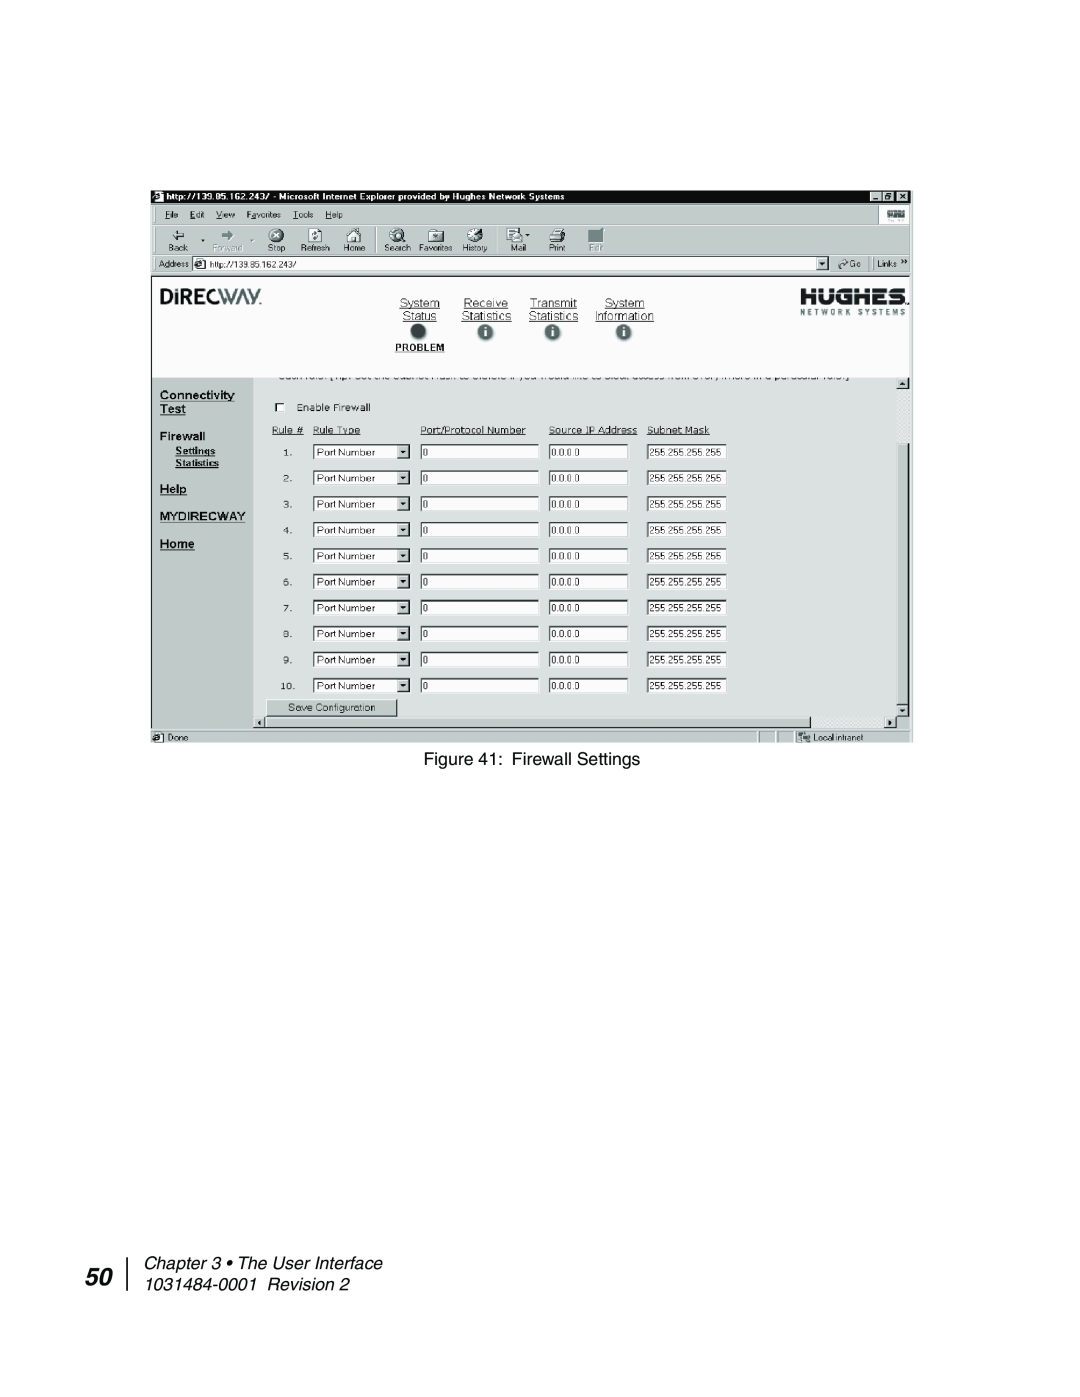 Hughes DW4020 manual Firewall Settings, The User Interface 1031484-0001 Revision 